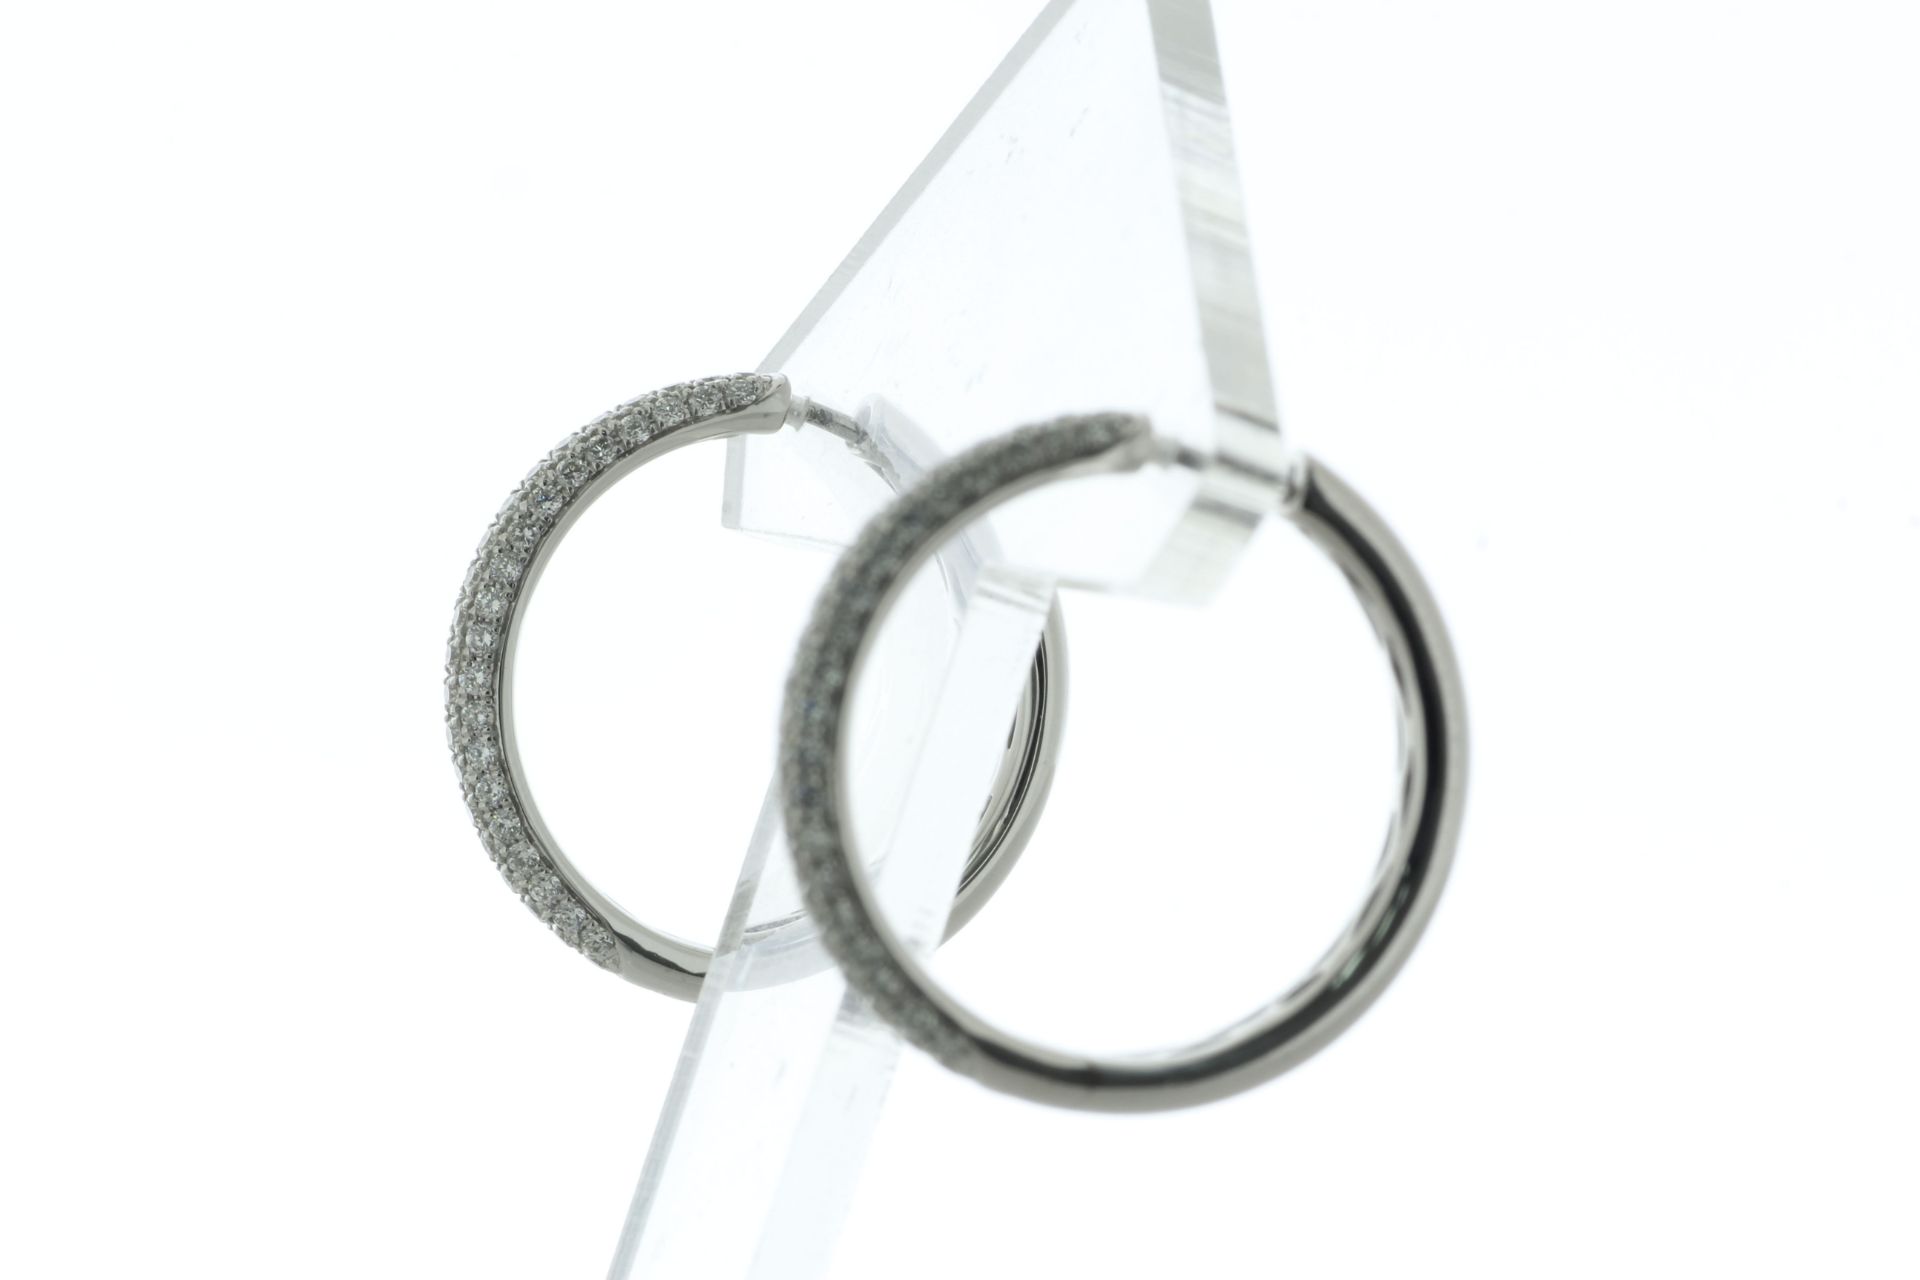 18ct White Gold Claw Set Hoop Diamond Earring 0.97 Carats - Valued By IDI £9,200.00 - One hundred - Image 3 of 4